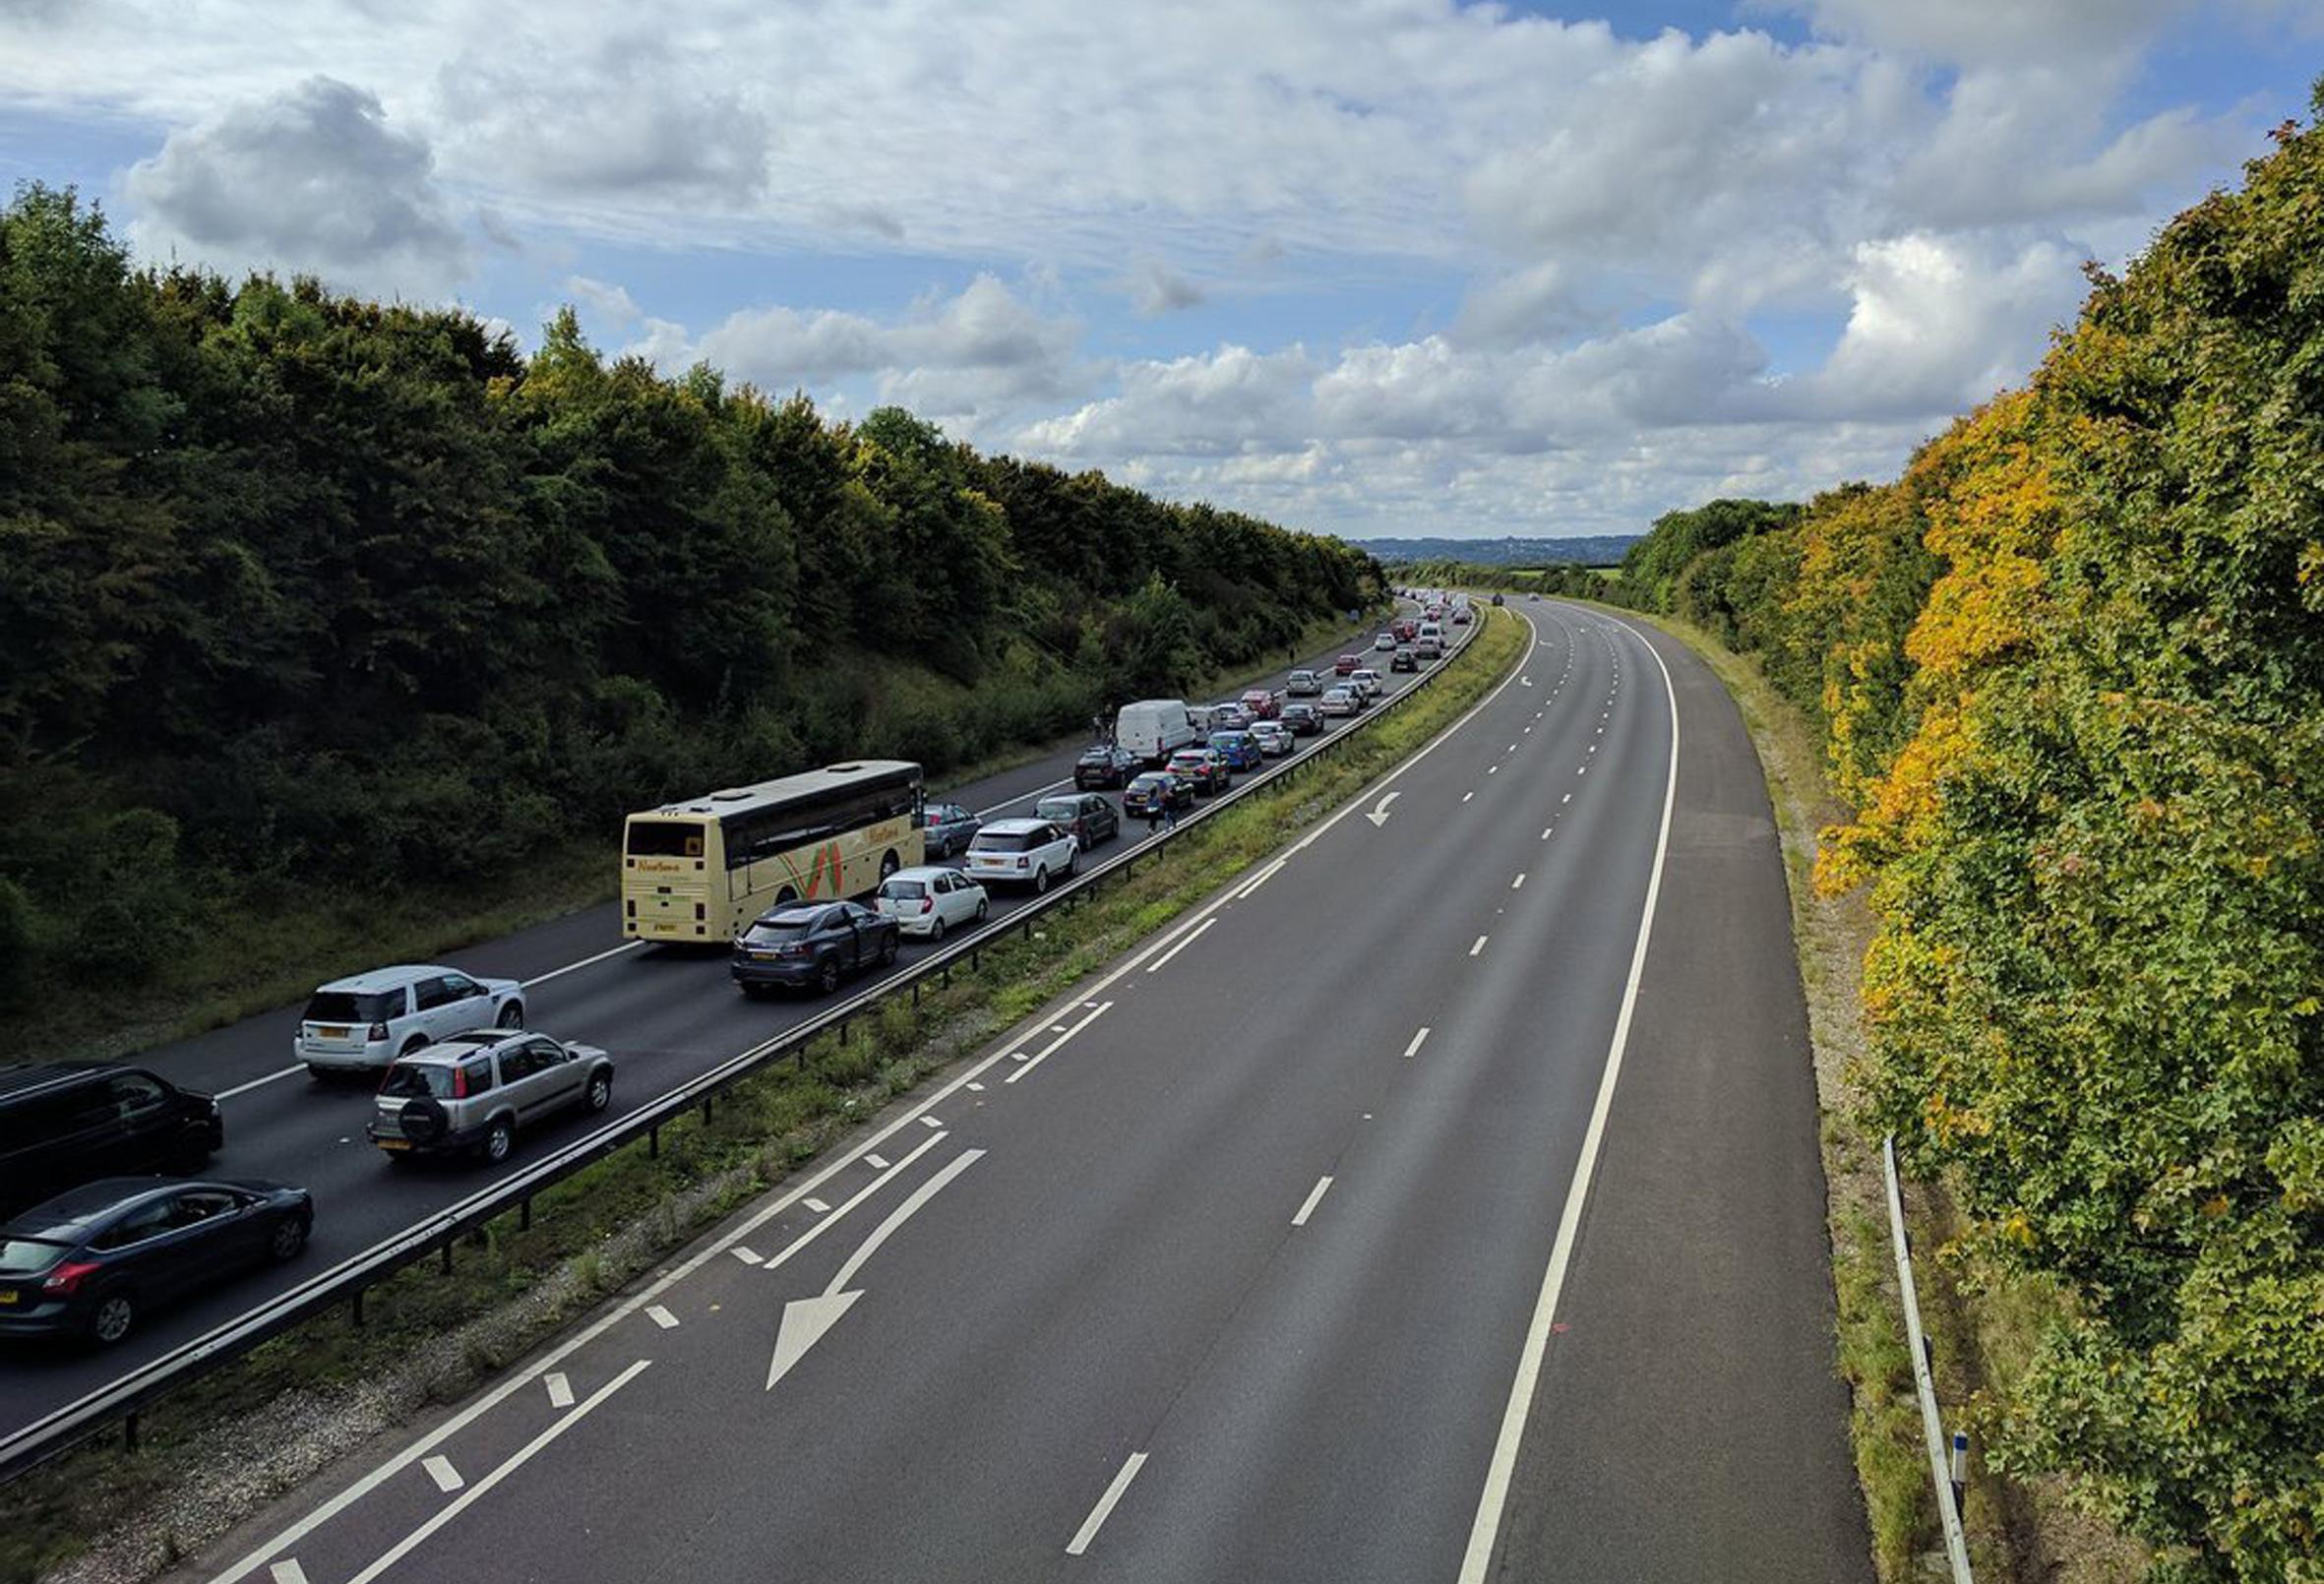 Traffic at standstill on the M3 motorway after police shut a section of the motorway